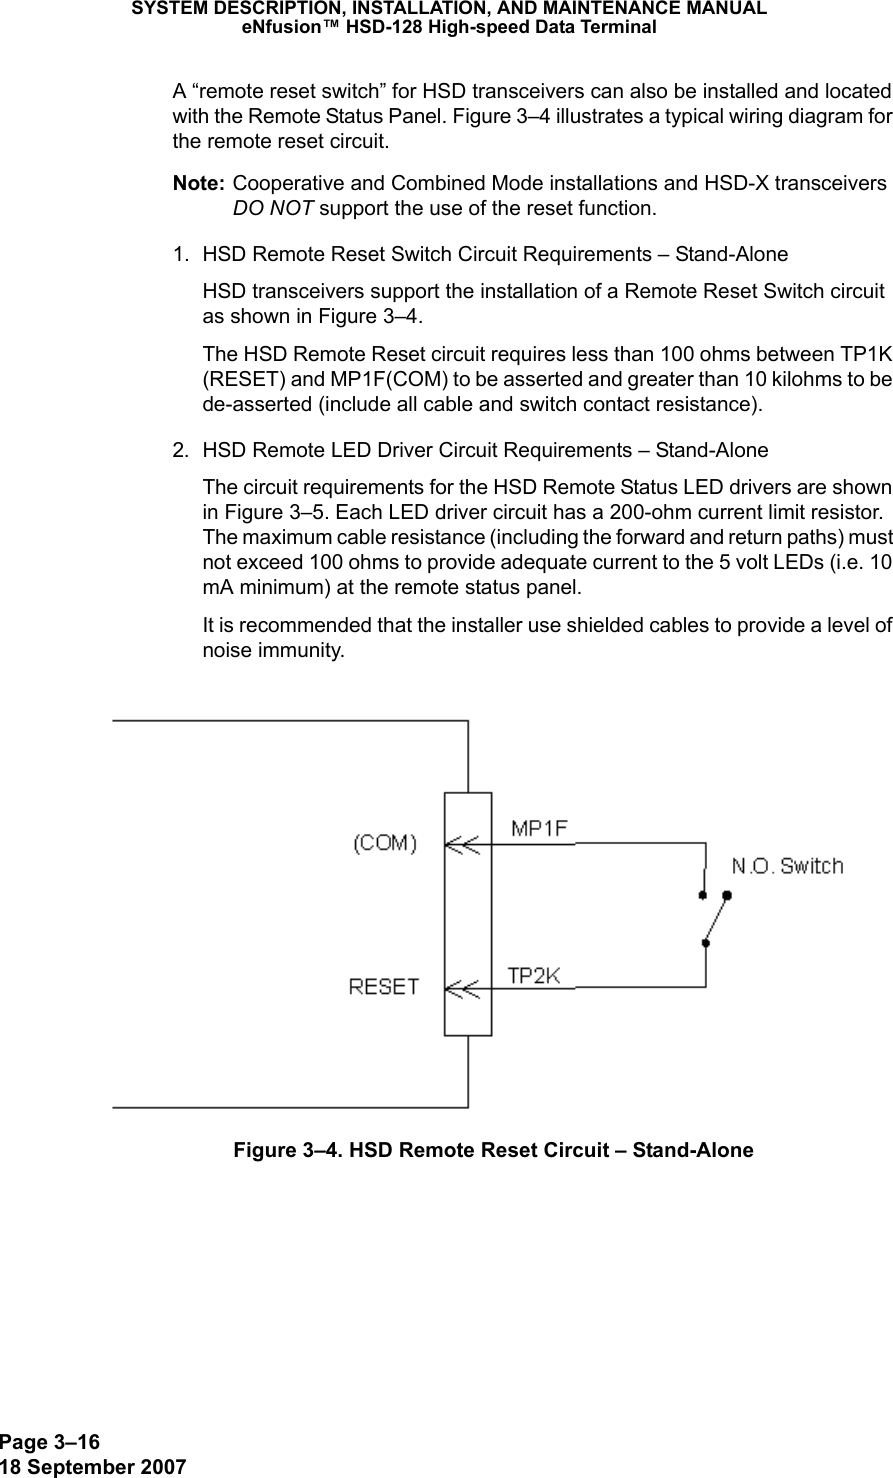 Page 3–1618 September 2007SYSTEM DESCRIPTION, INSTALLATION, AND MAINTENANCE MANUALeNfusion™ HSD-128 High-speed Data TerminalA “remote reset switch” for HSD transceivers can also be installed and located with the Remote Status Panel. Figure 3–4 illustrates a typical wiring diagram for the remote reset circuit. Note: Cooperative and Combined Mode installations and HSD-X transceivers DO NOT support the use of the reset function. 1. HSD Remote Reset Switch Circuit Requirements – Stand-AloneHSD transceivers support the installation of a Remote Reset Switch circuit as shown in Figure 3–4.The HSD Remote Reset circuit requires less than 100 ohms between TP1K (RESET) and MP1F(COM) to be asserted and greater than 10 kilohms to be  de-asserted (include all cable and switch contact resistance).2. HSD Remote LED Driver Circuit Requirements – Stand-AloneThe circuit requirements for the HSD Remote Status LED drivers are shown in Figure 3–5. Each LED driver circuit has a 200-ohm current limit resistor. The maximum cable resistance (including the forward and return paths) must not exceed 100 ohms to provide adequate current to the 5 volt LEDs (i.e. 10 mA minimum) at the remote status panel. It is recommended that the installer use shielded cables to provide a level of noise immunity.Figure 3–4. HSD Remote Reset Circuit – Stand-Alone